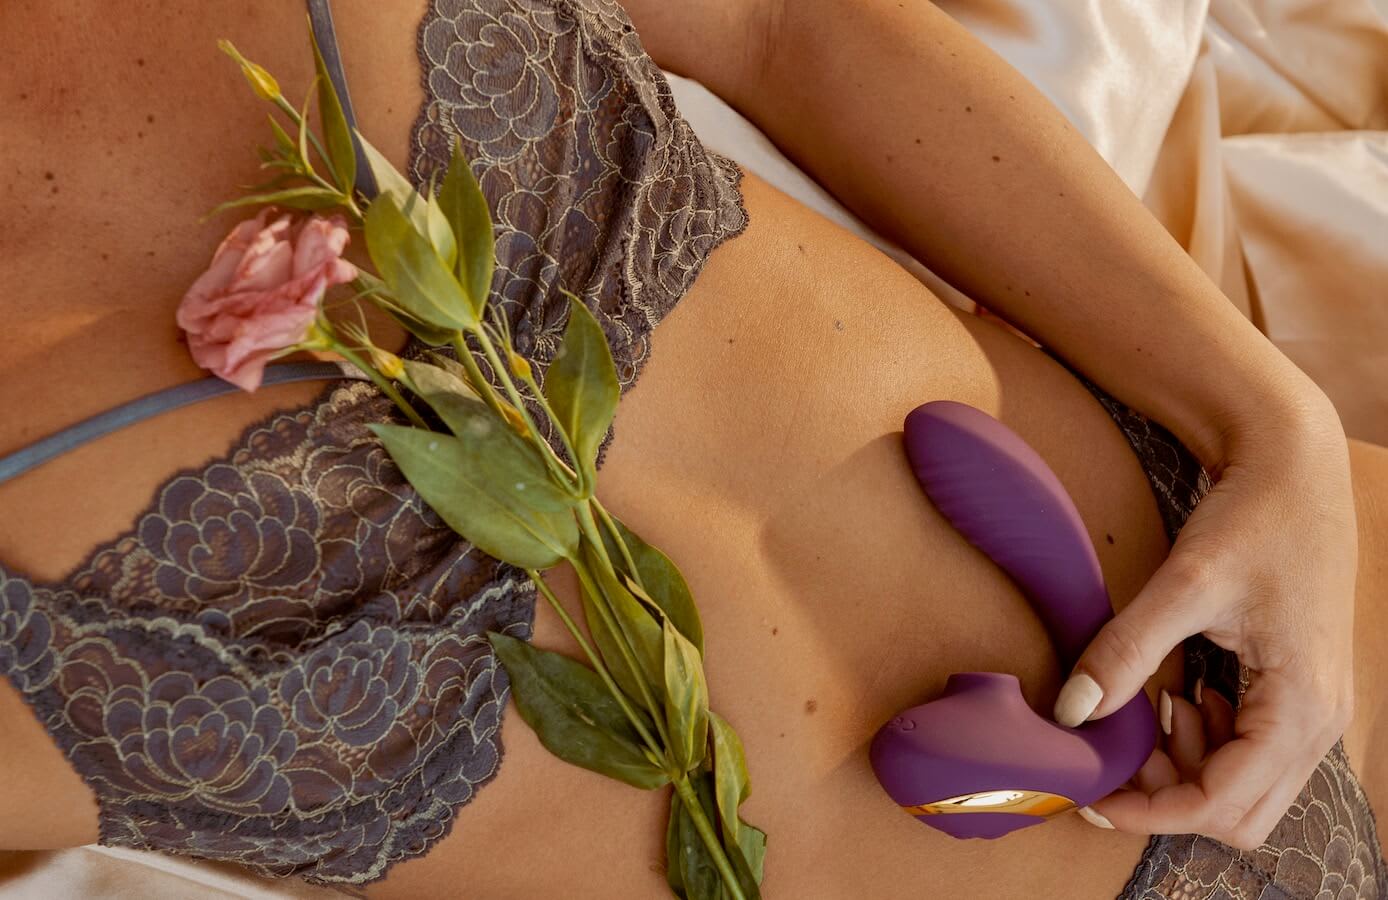 15 amazing sex toys to treat yourself to this Valentines Day Bellesa picture photo